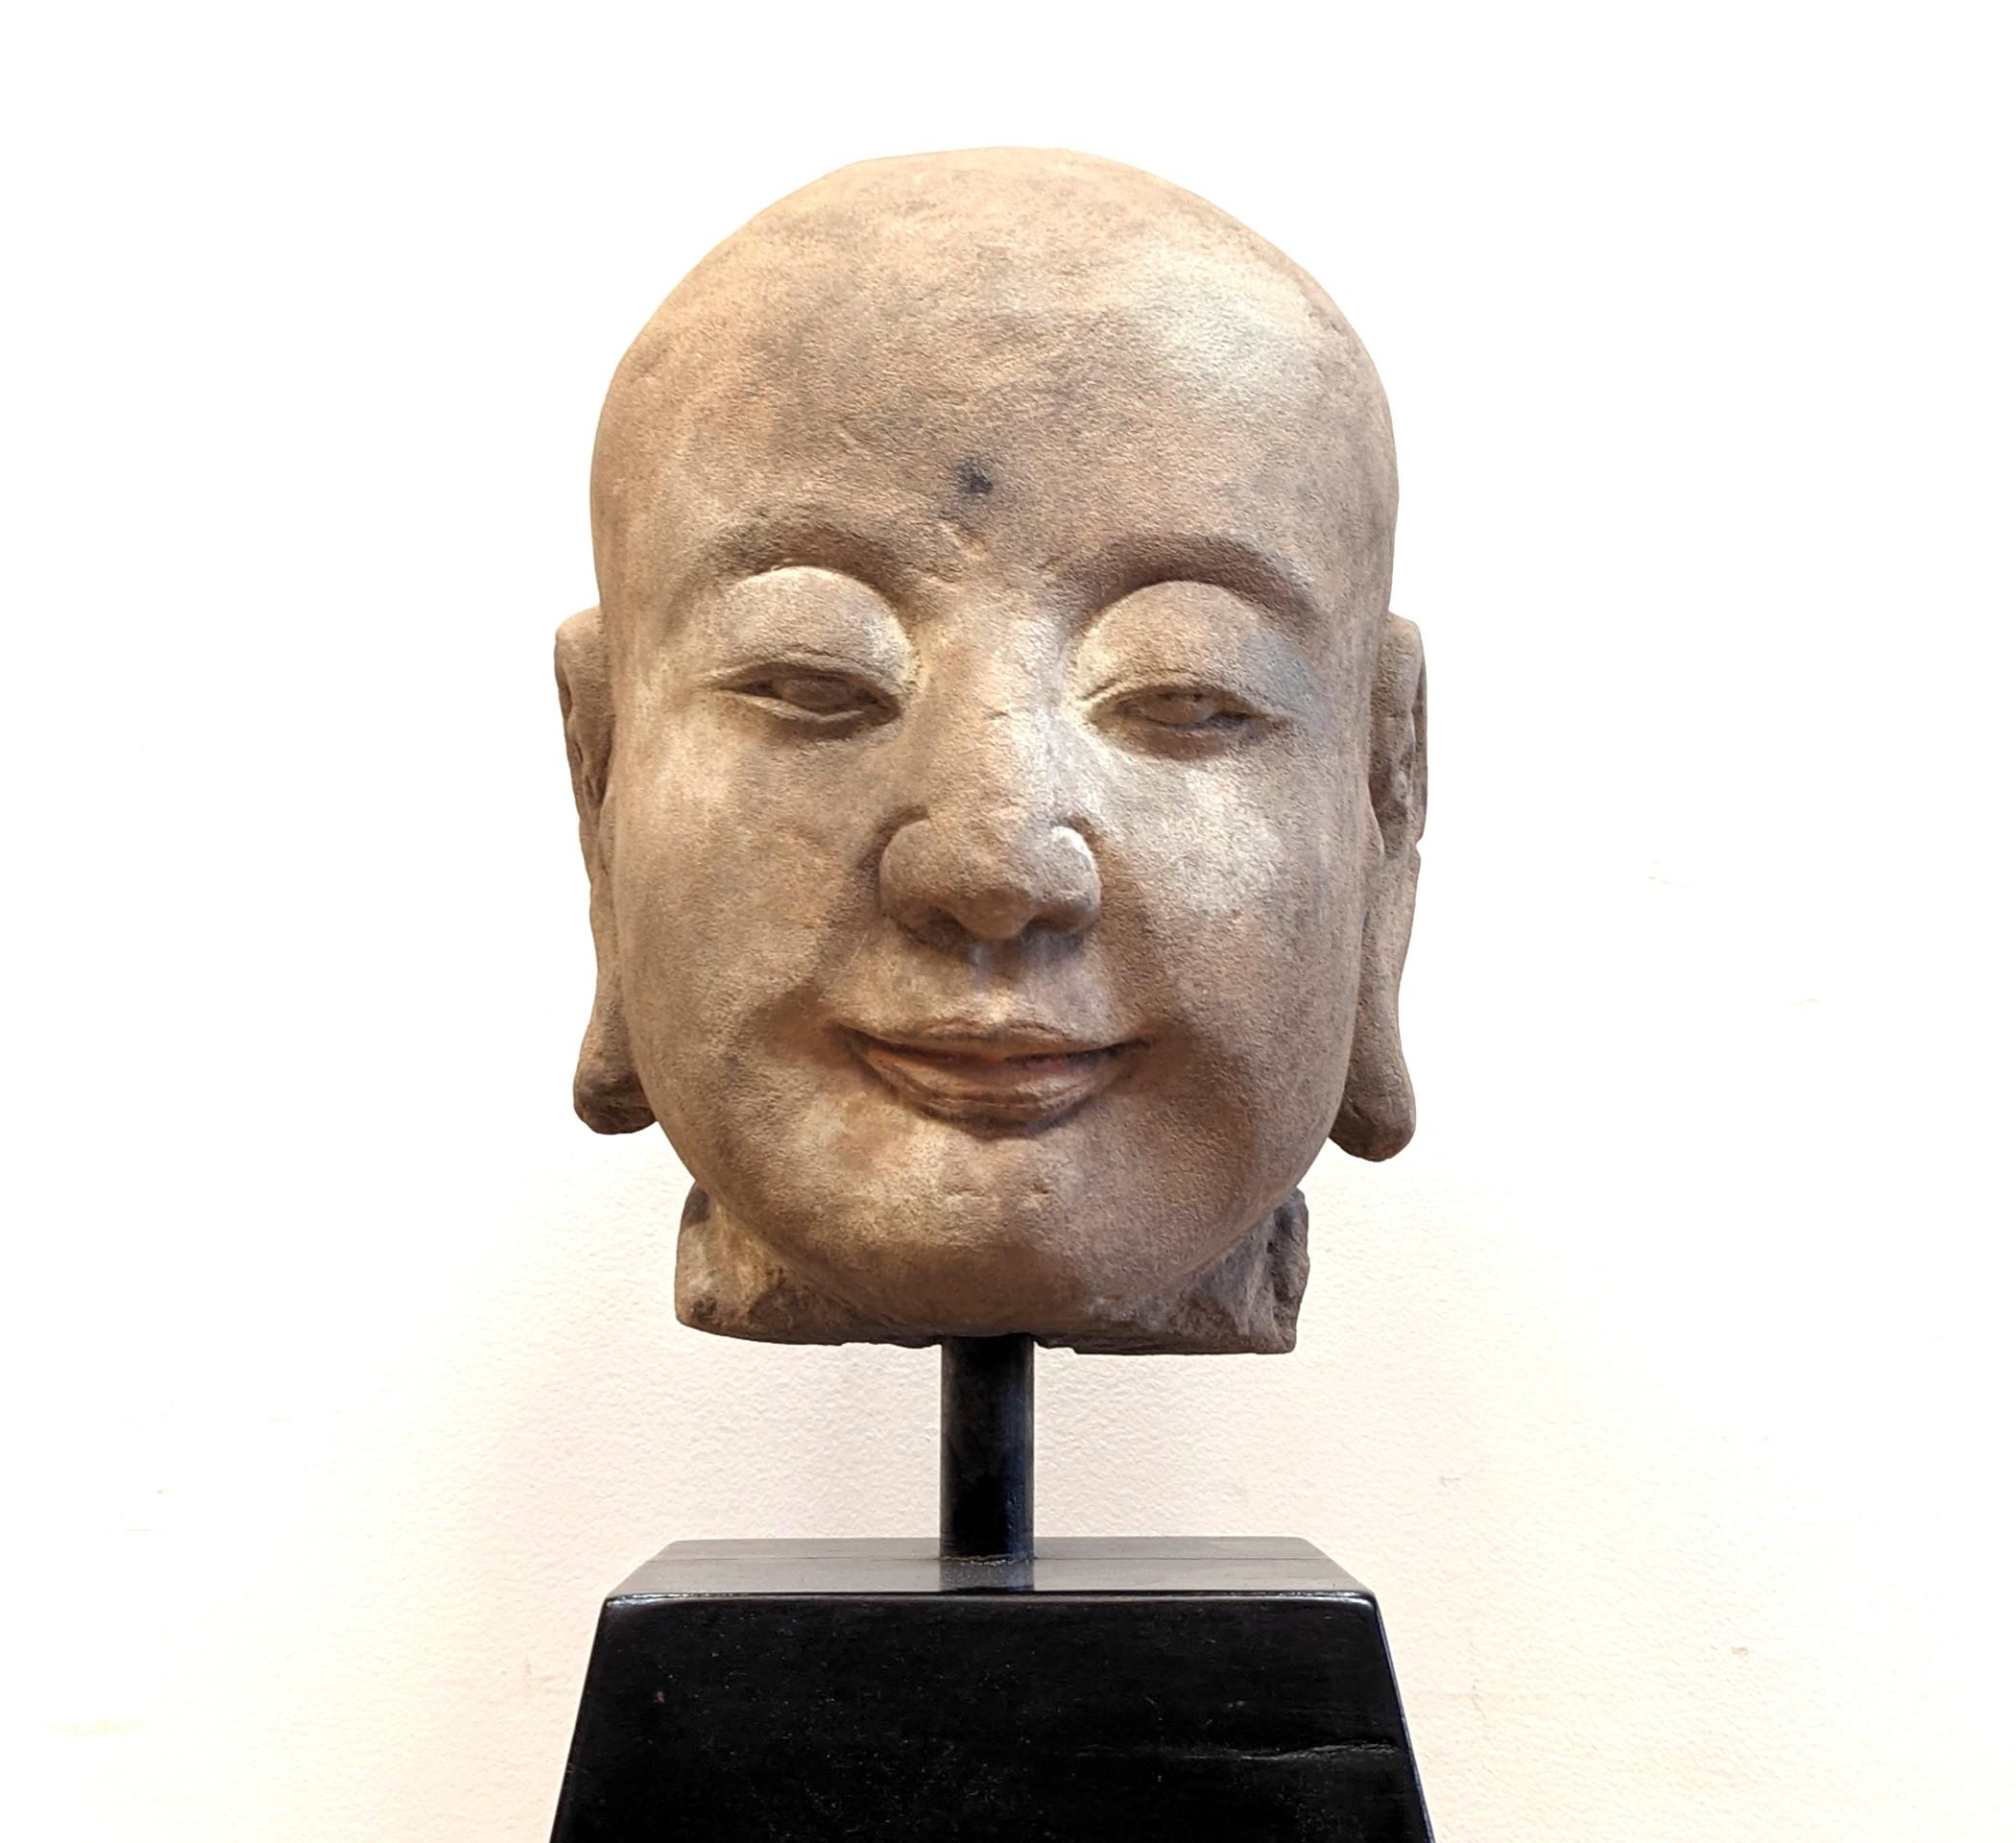 Antique Sandstone Buddhist Head Sculpture.  Sandstone Buddha Head 19th century or earlier Buddhist Head Sculpture.  Composed of sandstone sculpted by hand with captivating detail of serene expression, life like.  This interpretation believed to be